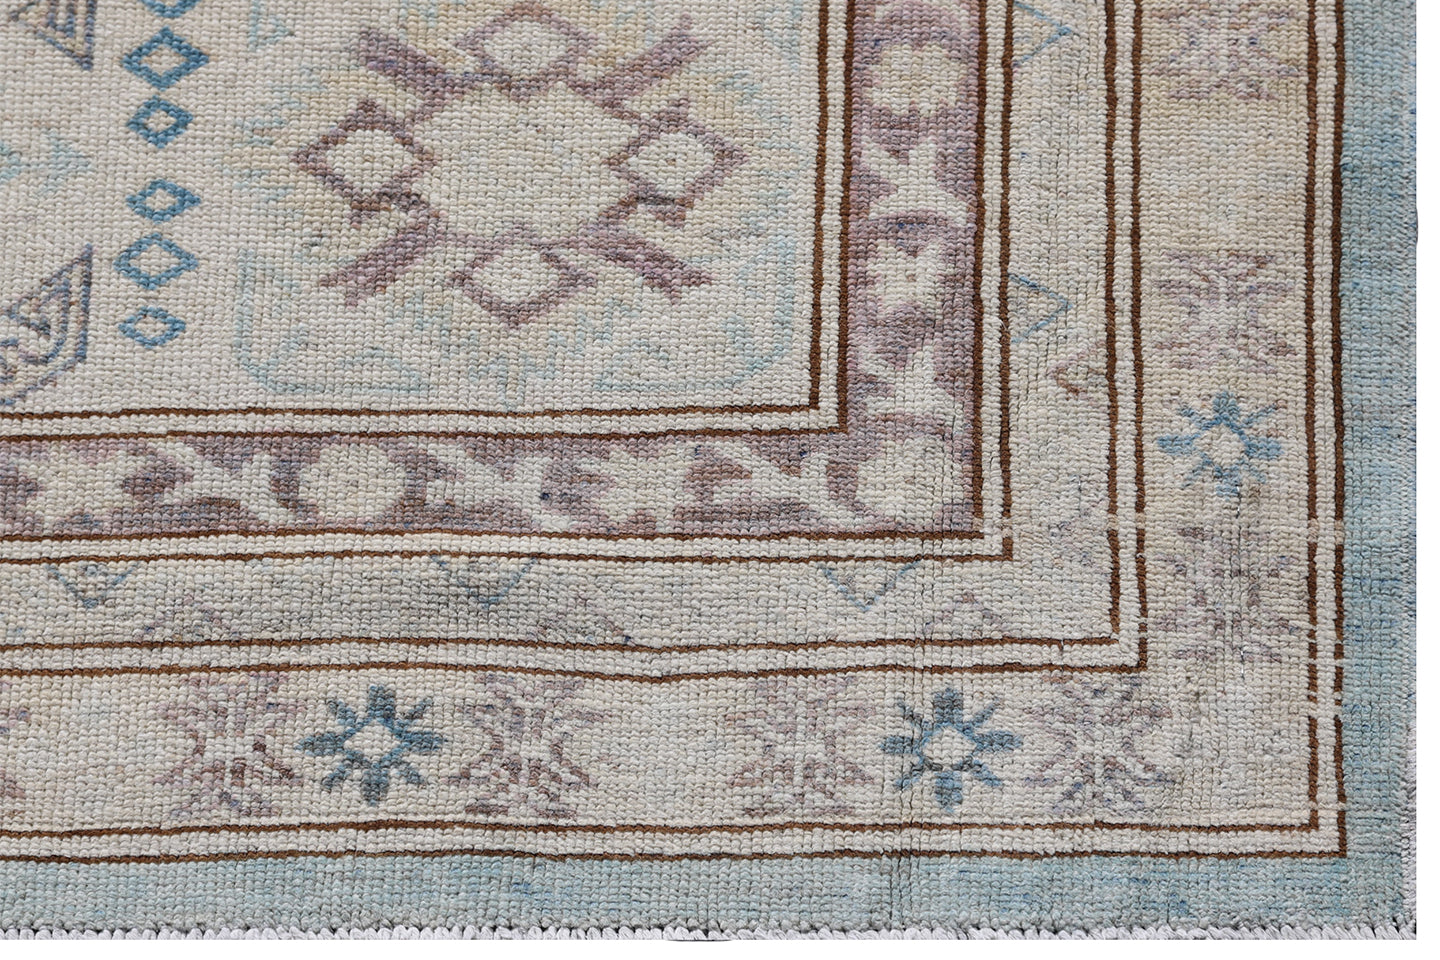 10'x13' Ariana Caucasian Traditional Blue Ivory Brown Rug